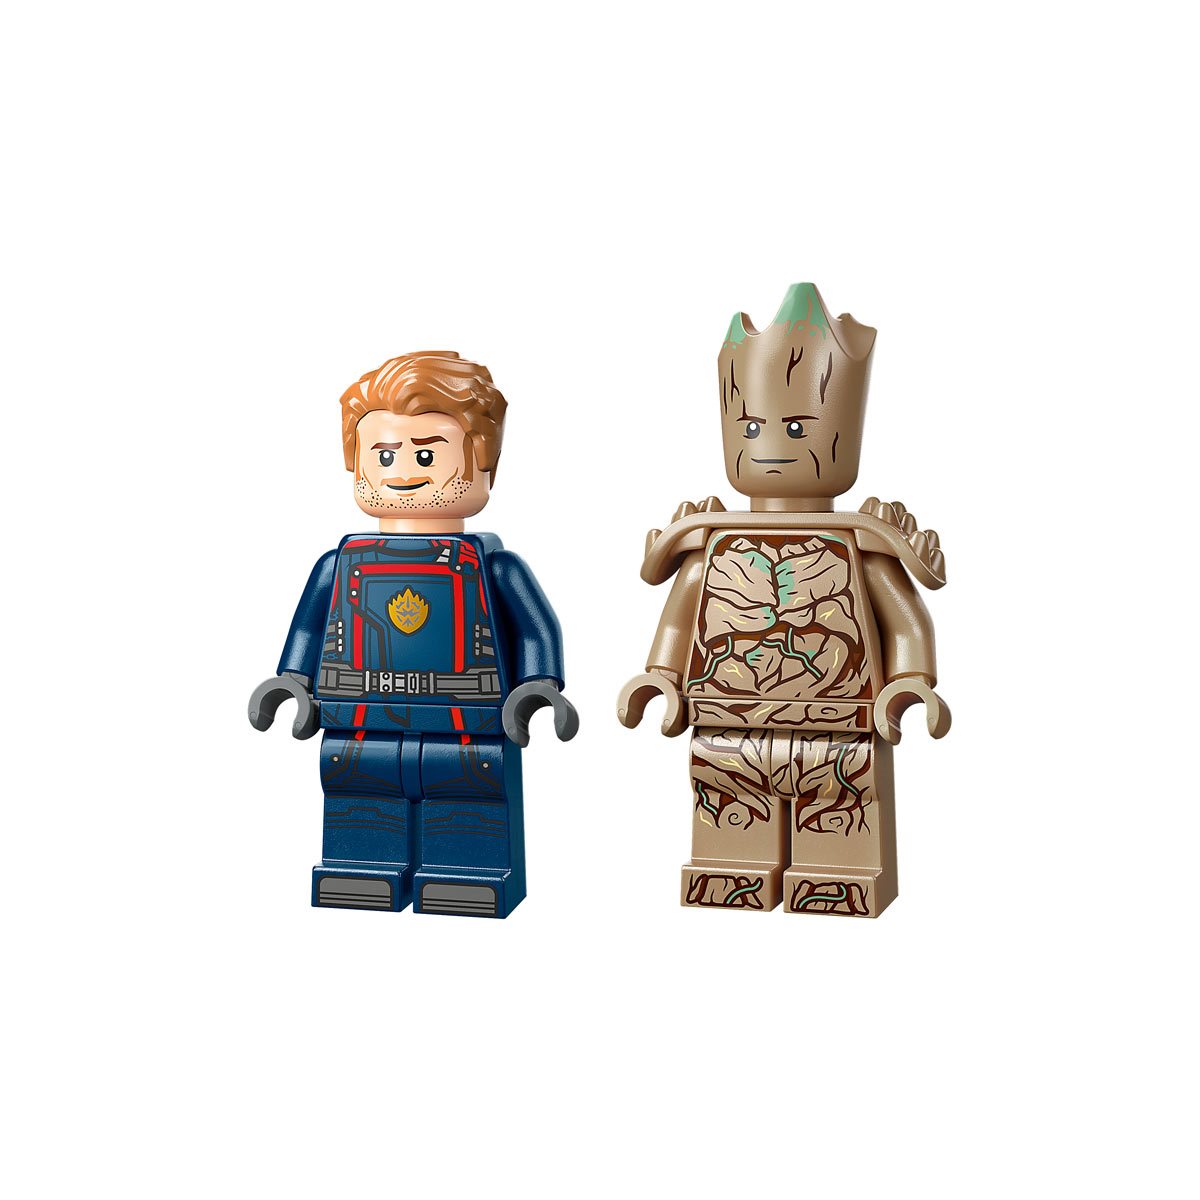 star lord guardians of the galaxy lego